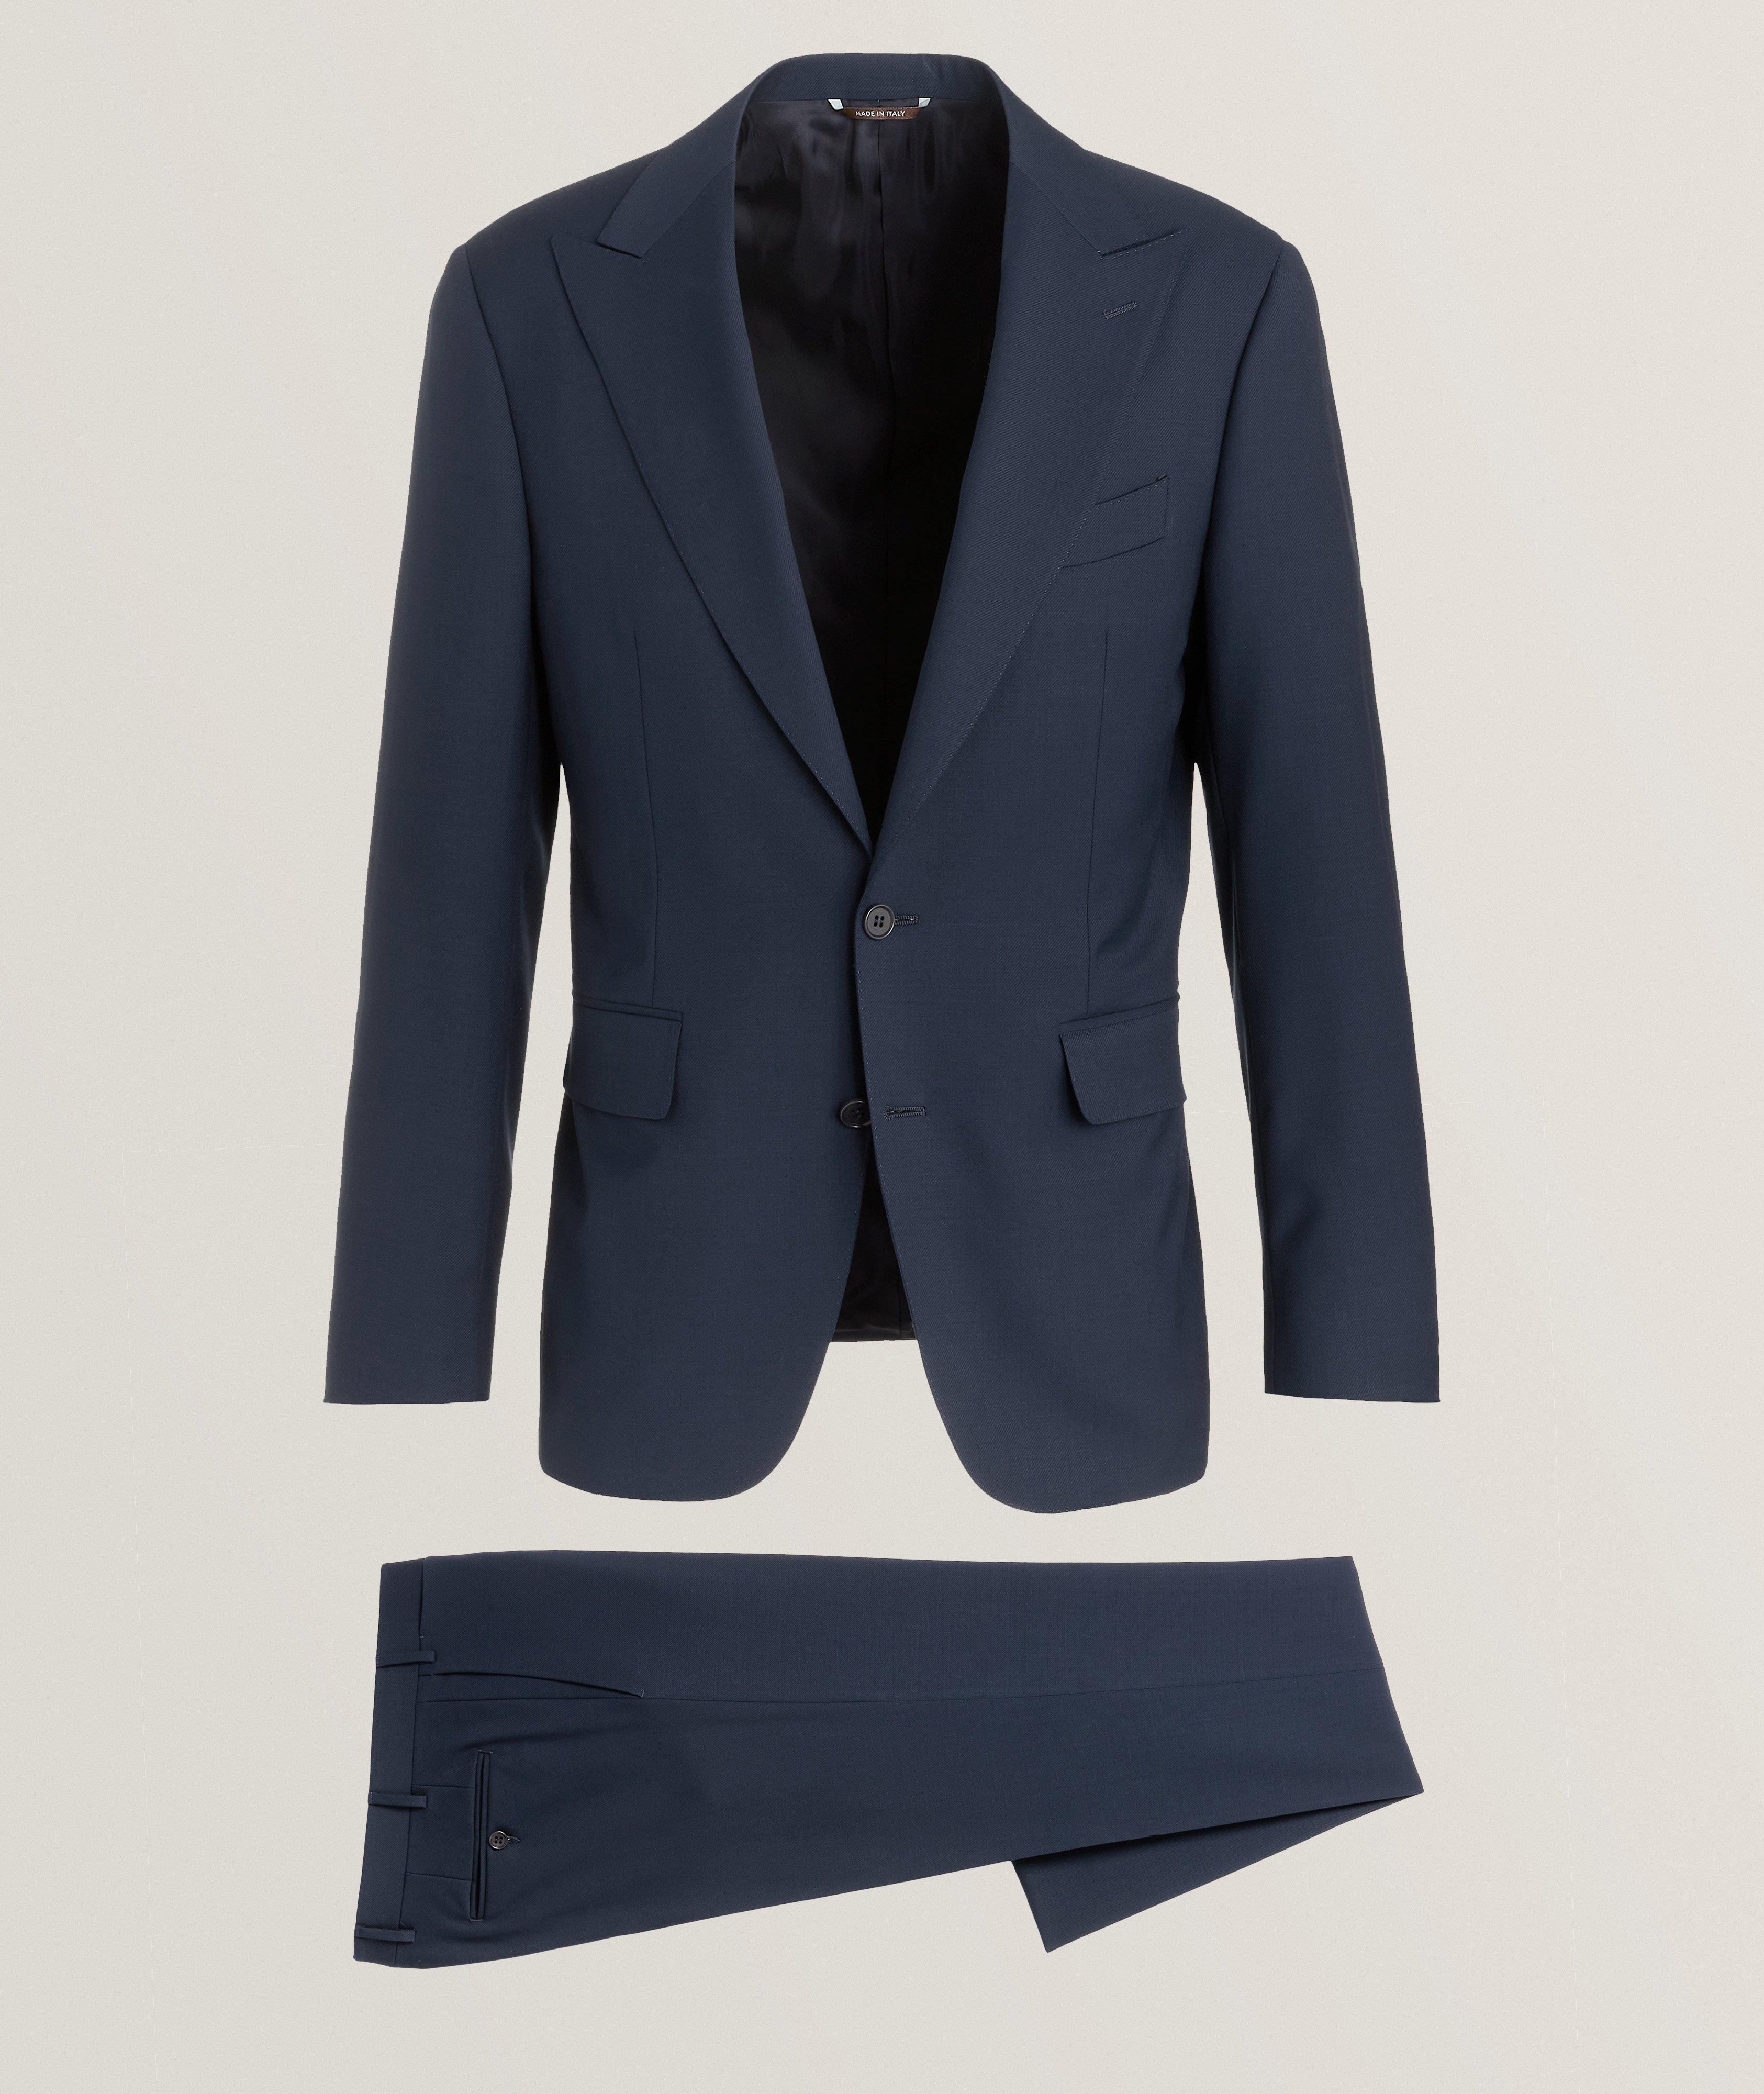 Canali Impeccabile Textured Wool Suit | Suits | Harry Rosen